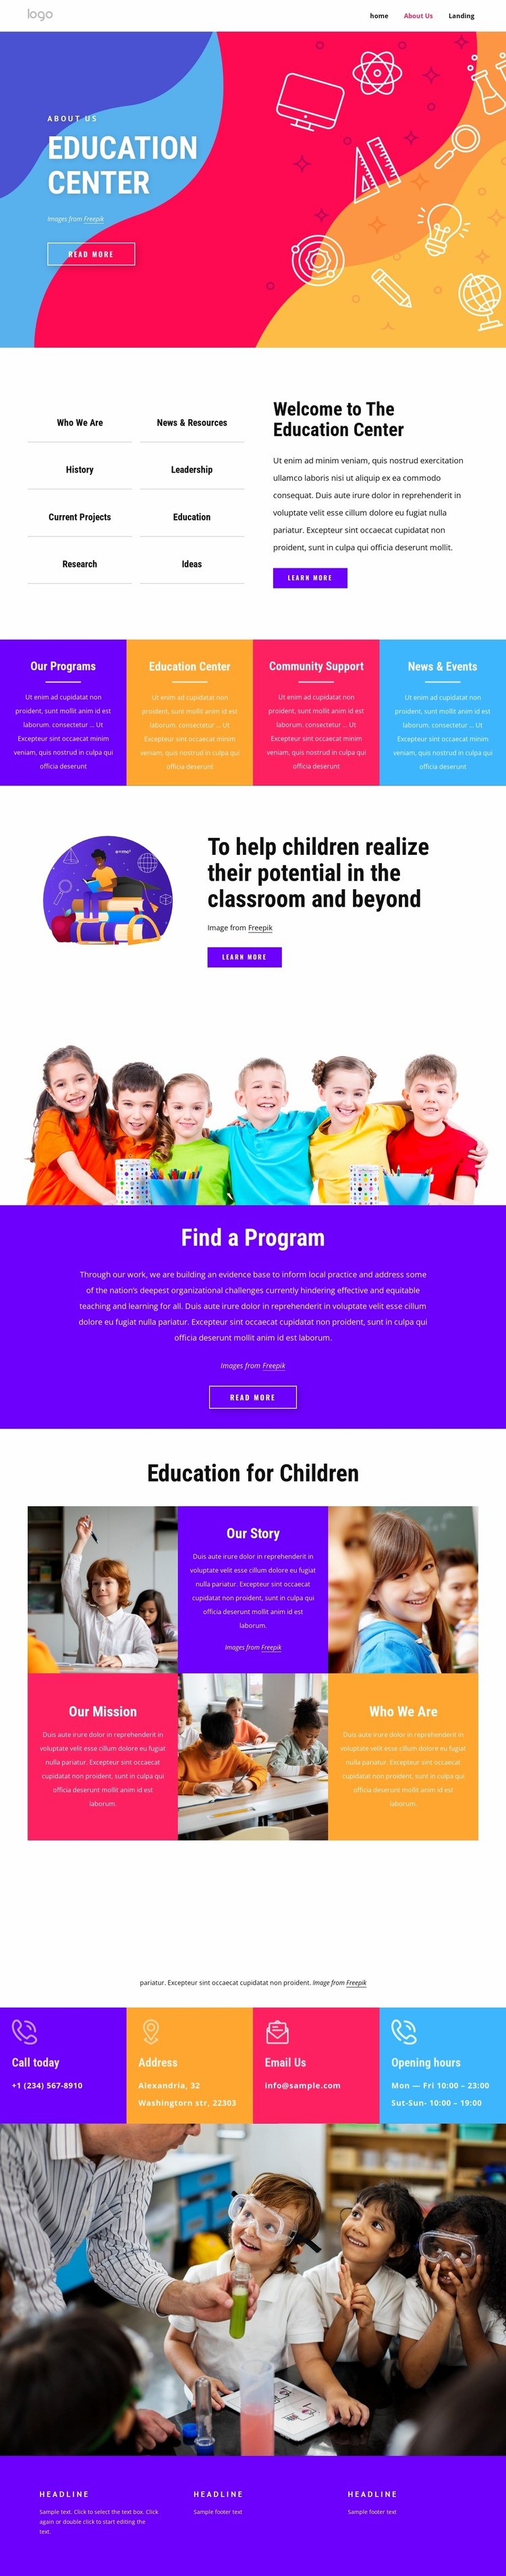 Family and education center Homepage Design